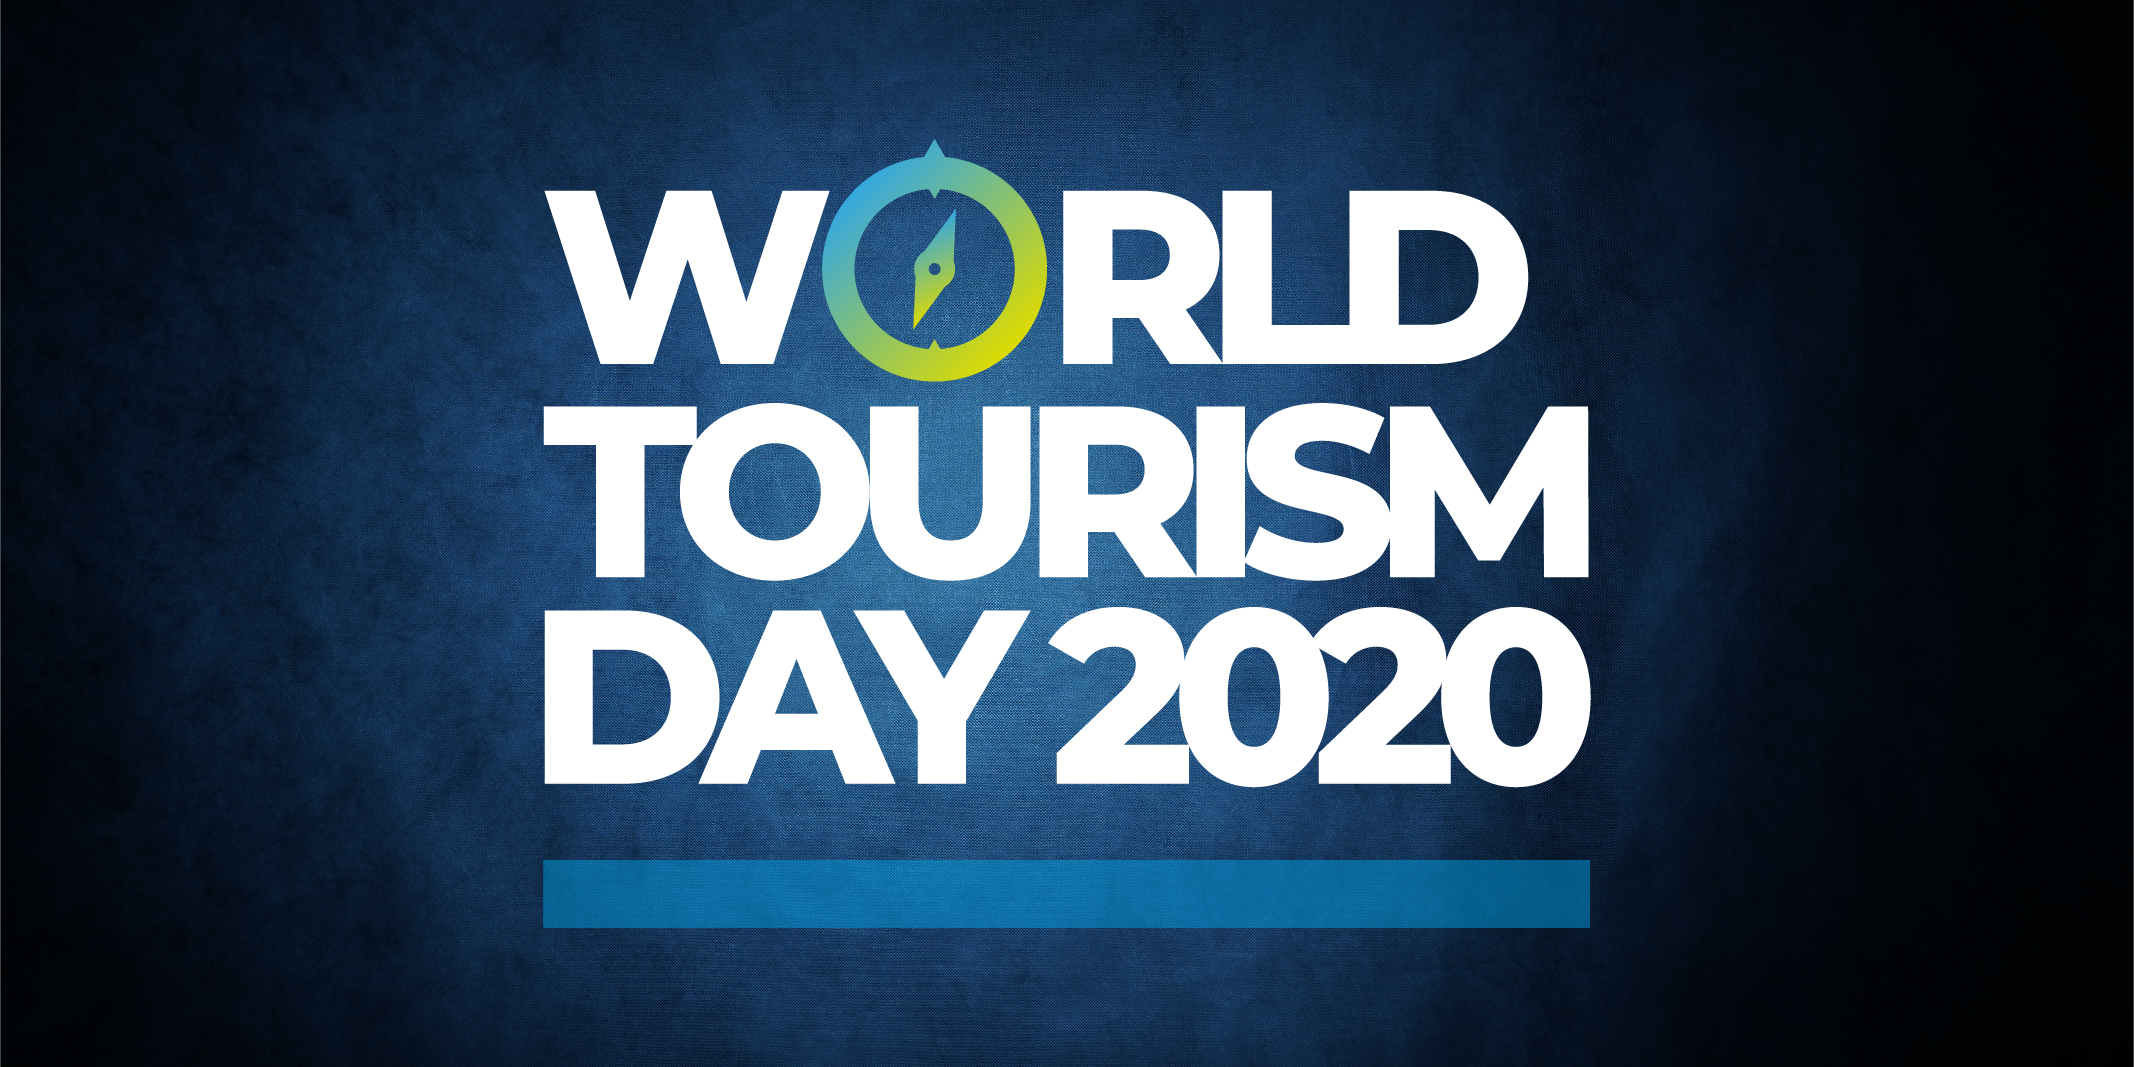 World Tourism Day 2020: Rebuilding tourism in a safe, equitable, climate-friendly way